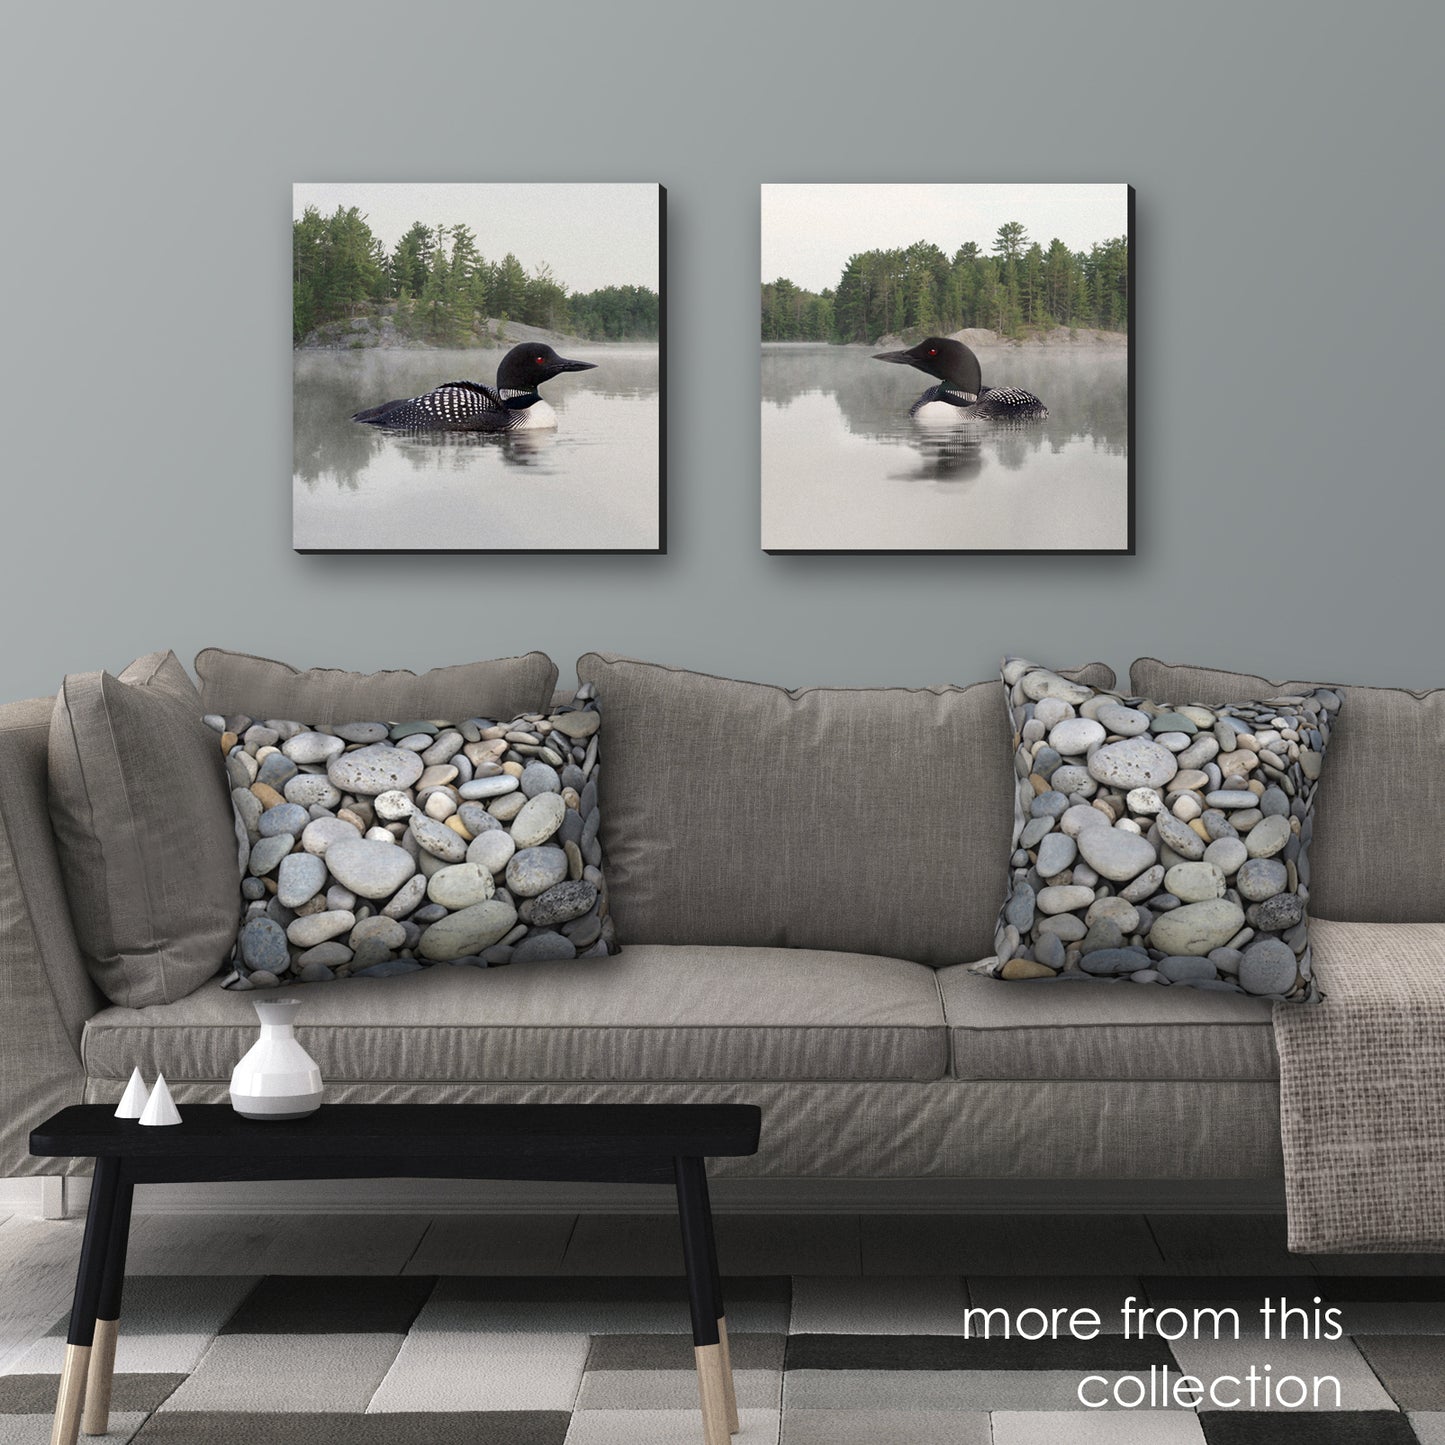 Loon on the Water Framed Fine Art Print